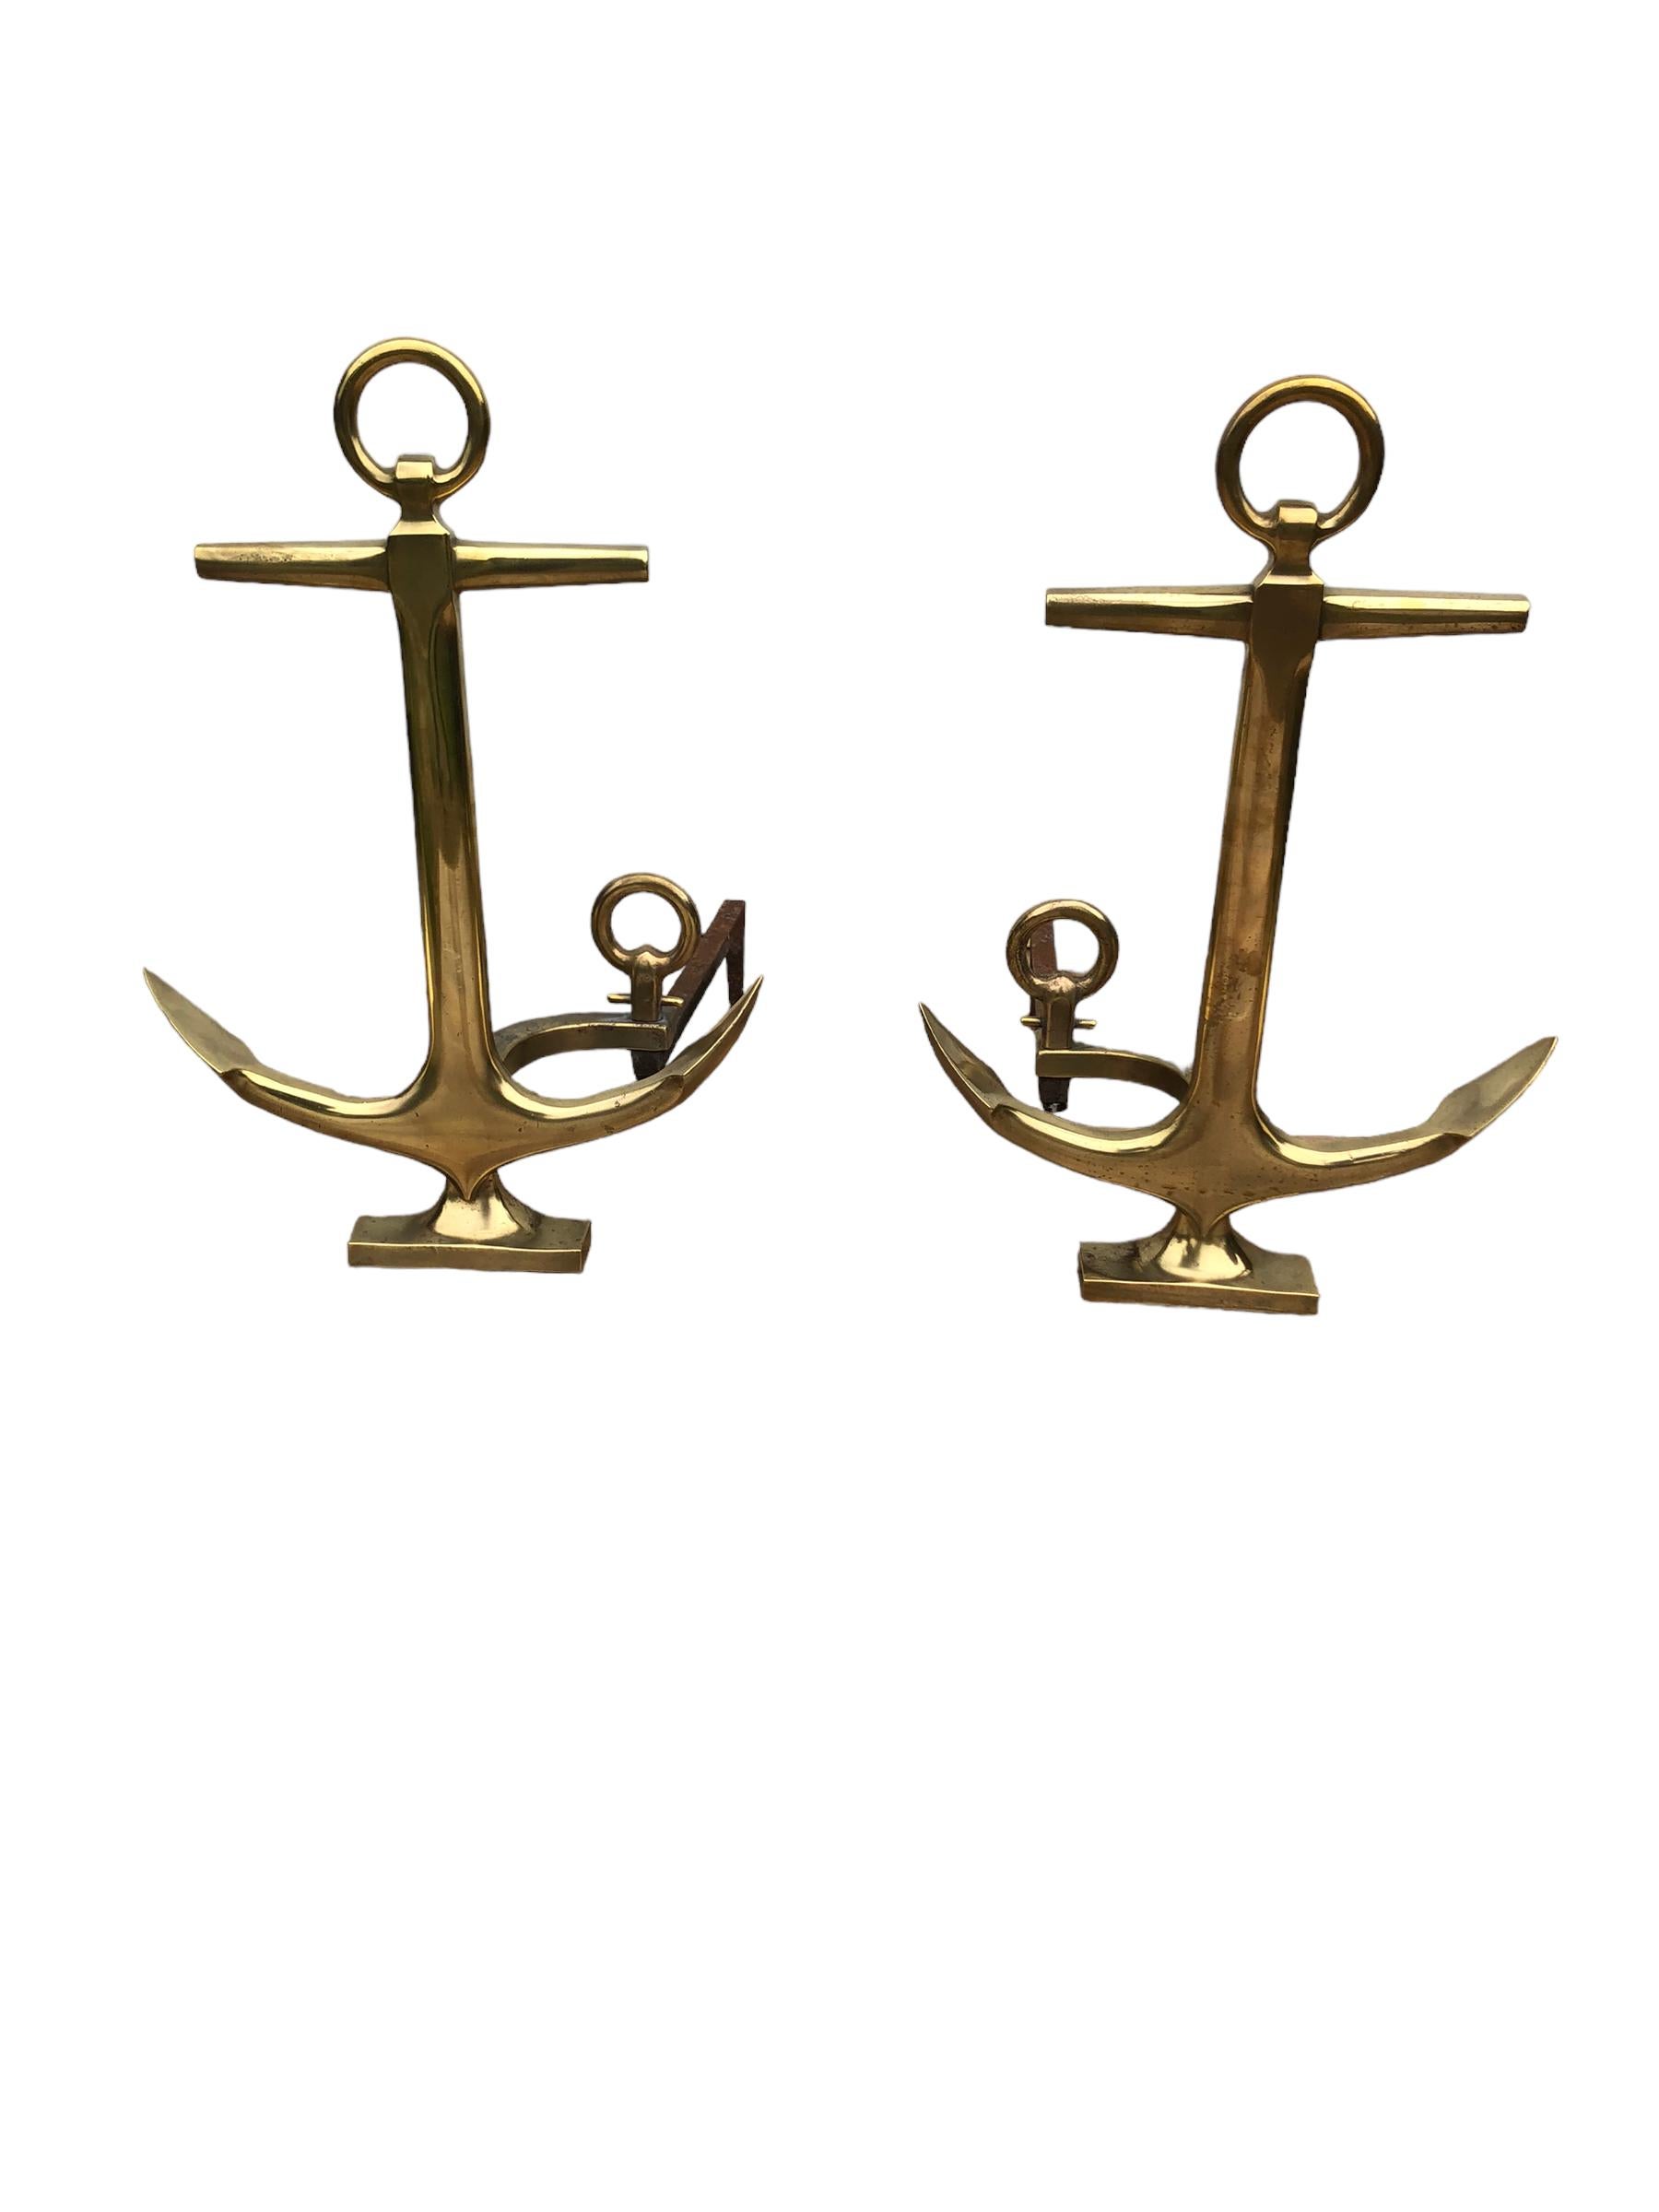 American Pair of Brass Anchor Andirons by Rostand